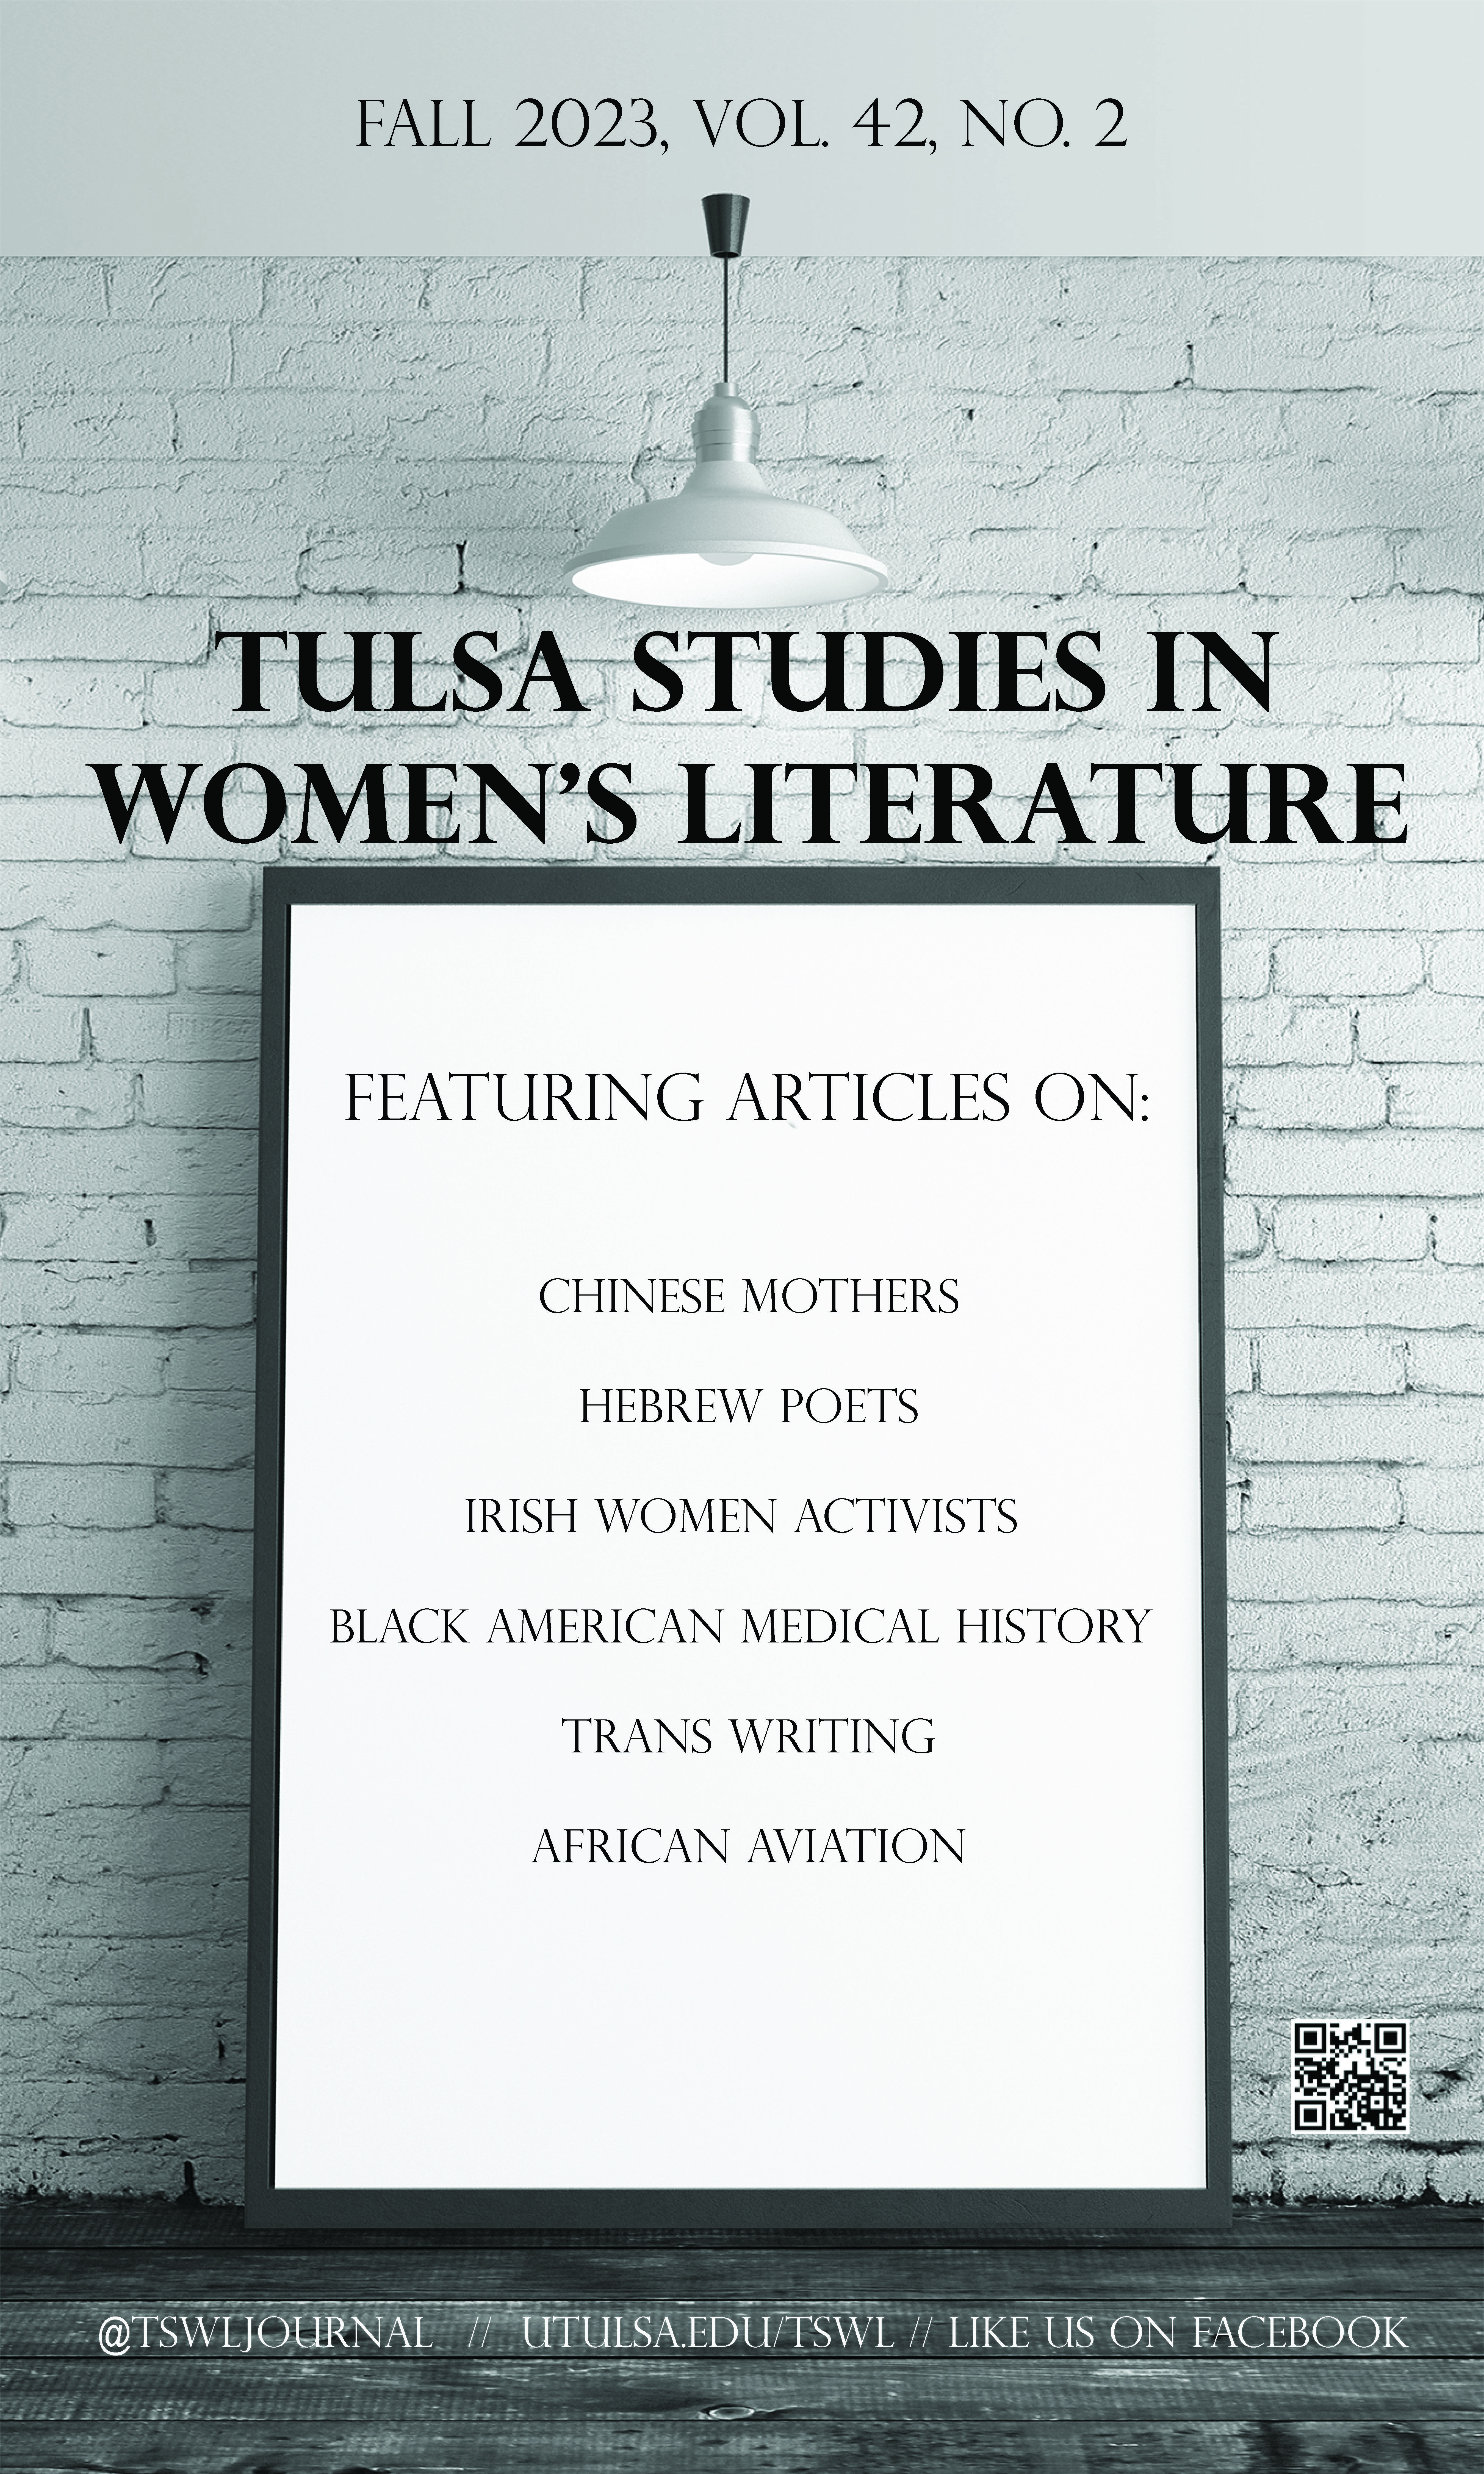 An image for the Fall 2023 Tulsa Studies in Women's Literature journal, which features a black and white image of whiteboard against a brick wall with a light shining on it. See more at utulsa.edu/TSWL